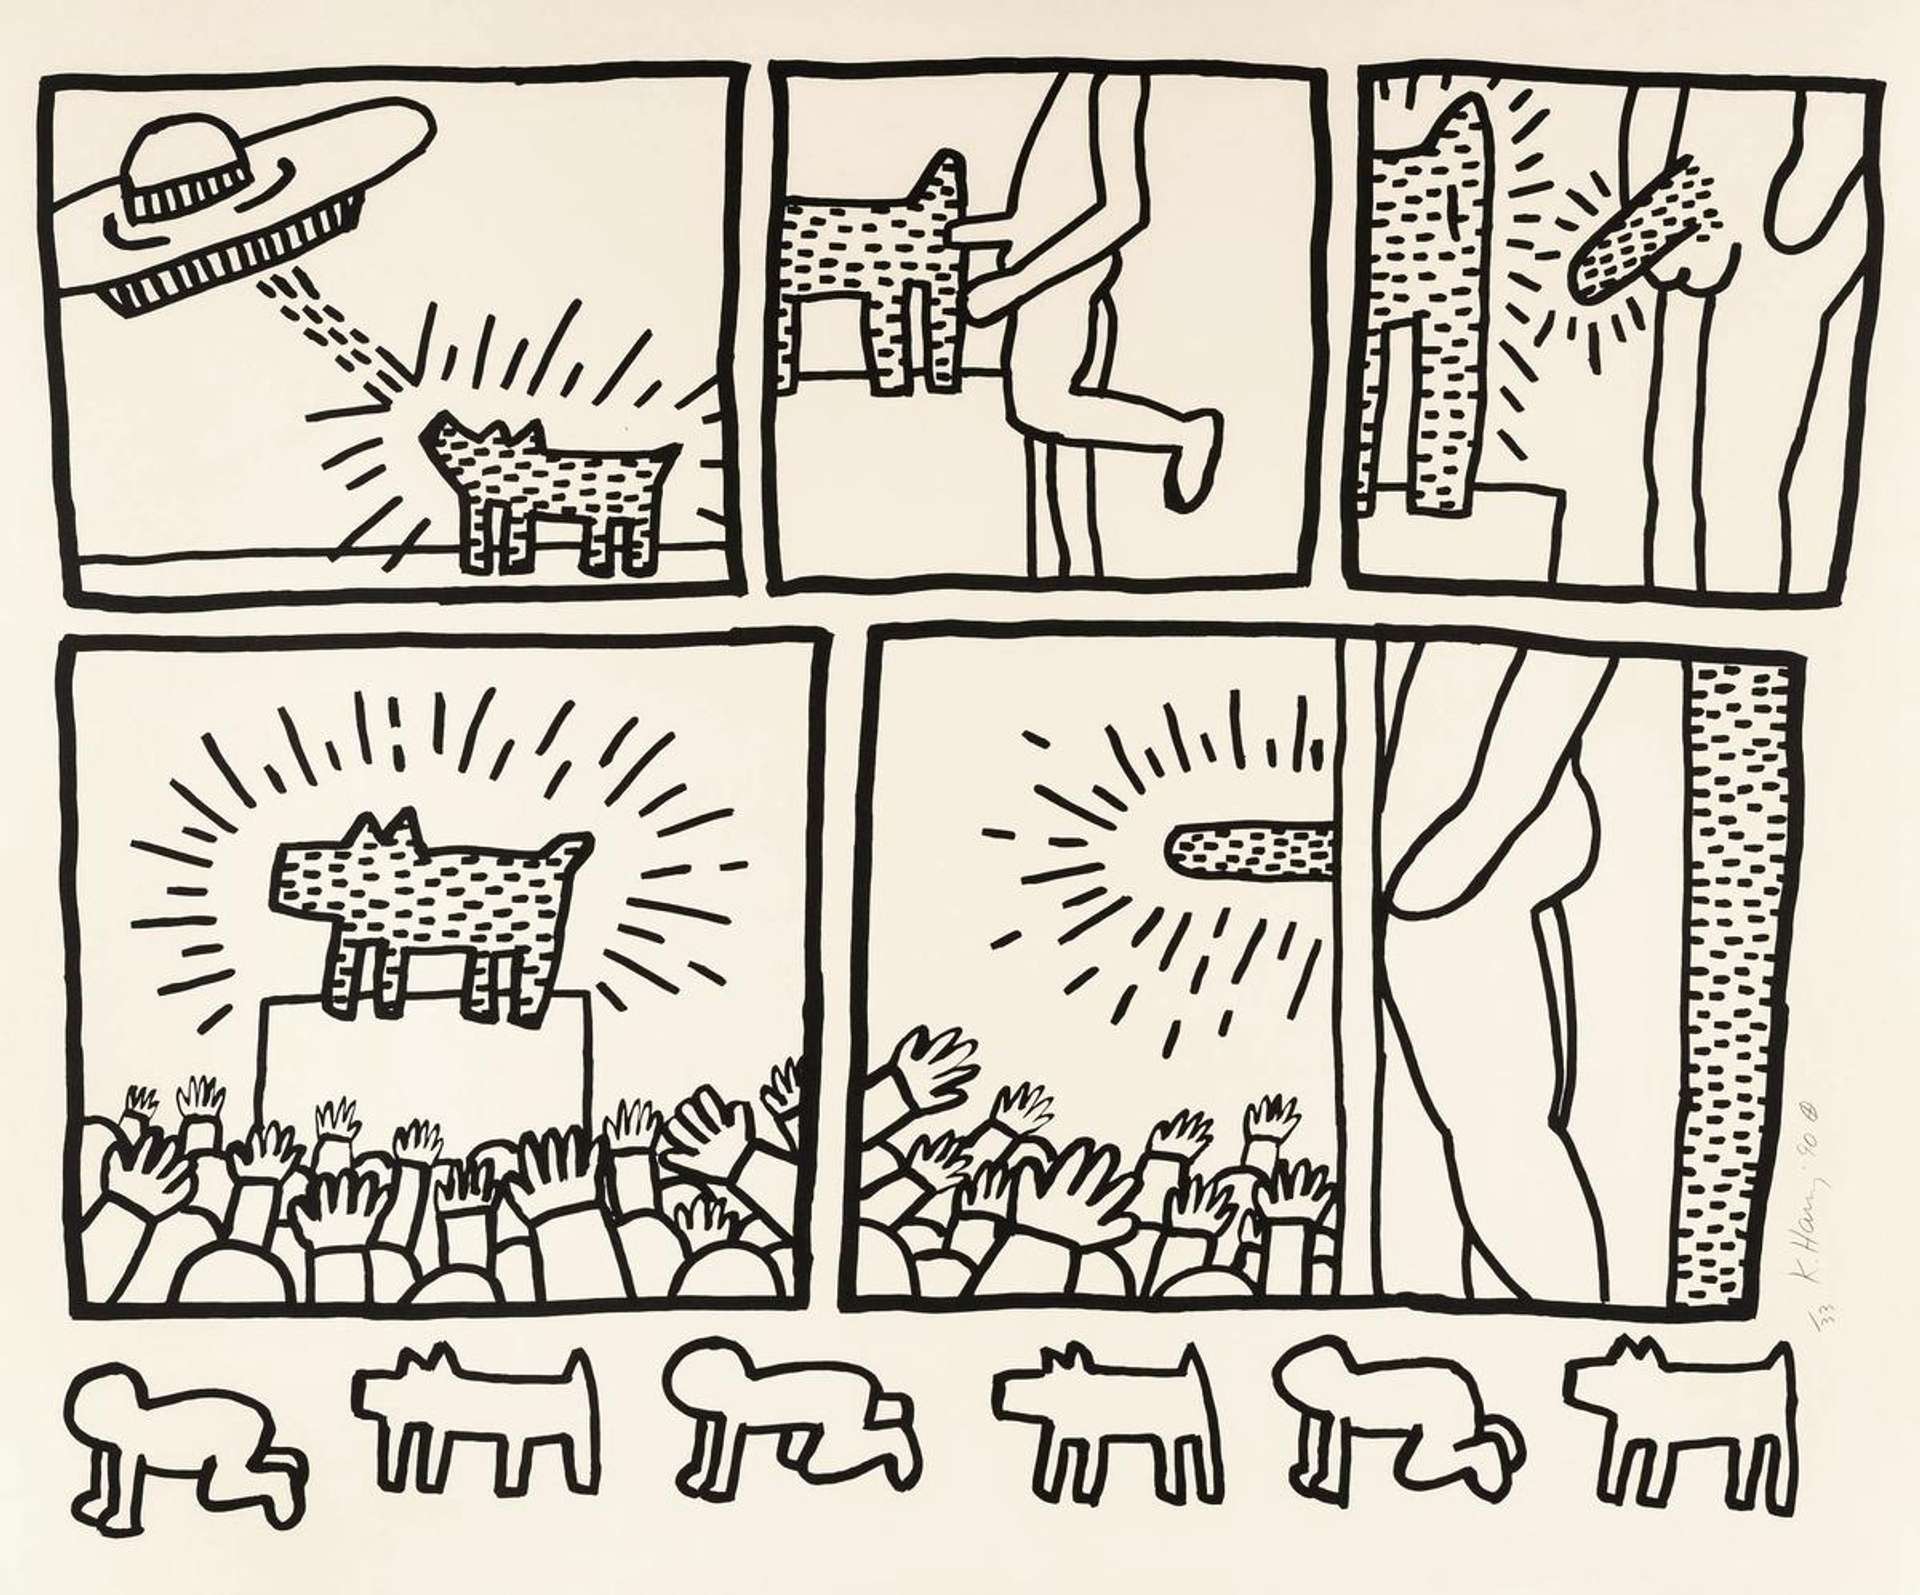 The Blueprint Drawings 13 shows a UFO emitting beams of light and striking a spotty barking dog, which is then penetrated by a figure with an erect penis. Haring uses dots in this print to convey the otherness of homosexuality and illness, specifically AIDS, and he depicts this process of transmission starting with the UFO and ending with the infection of the human figure.